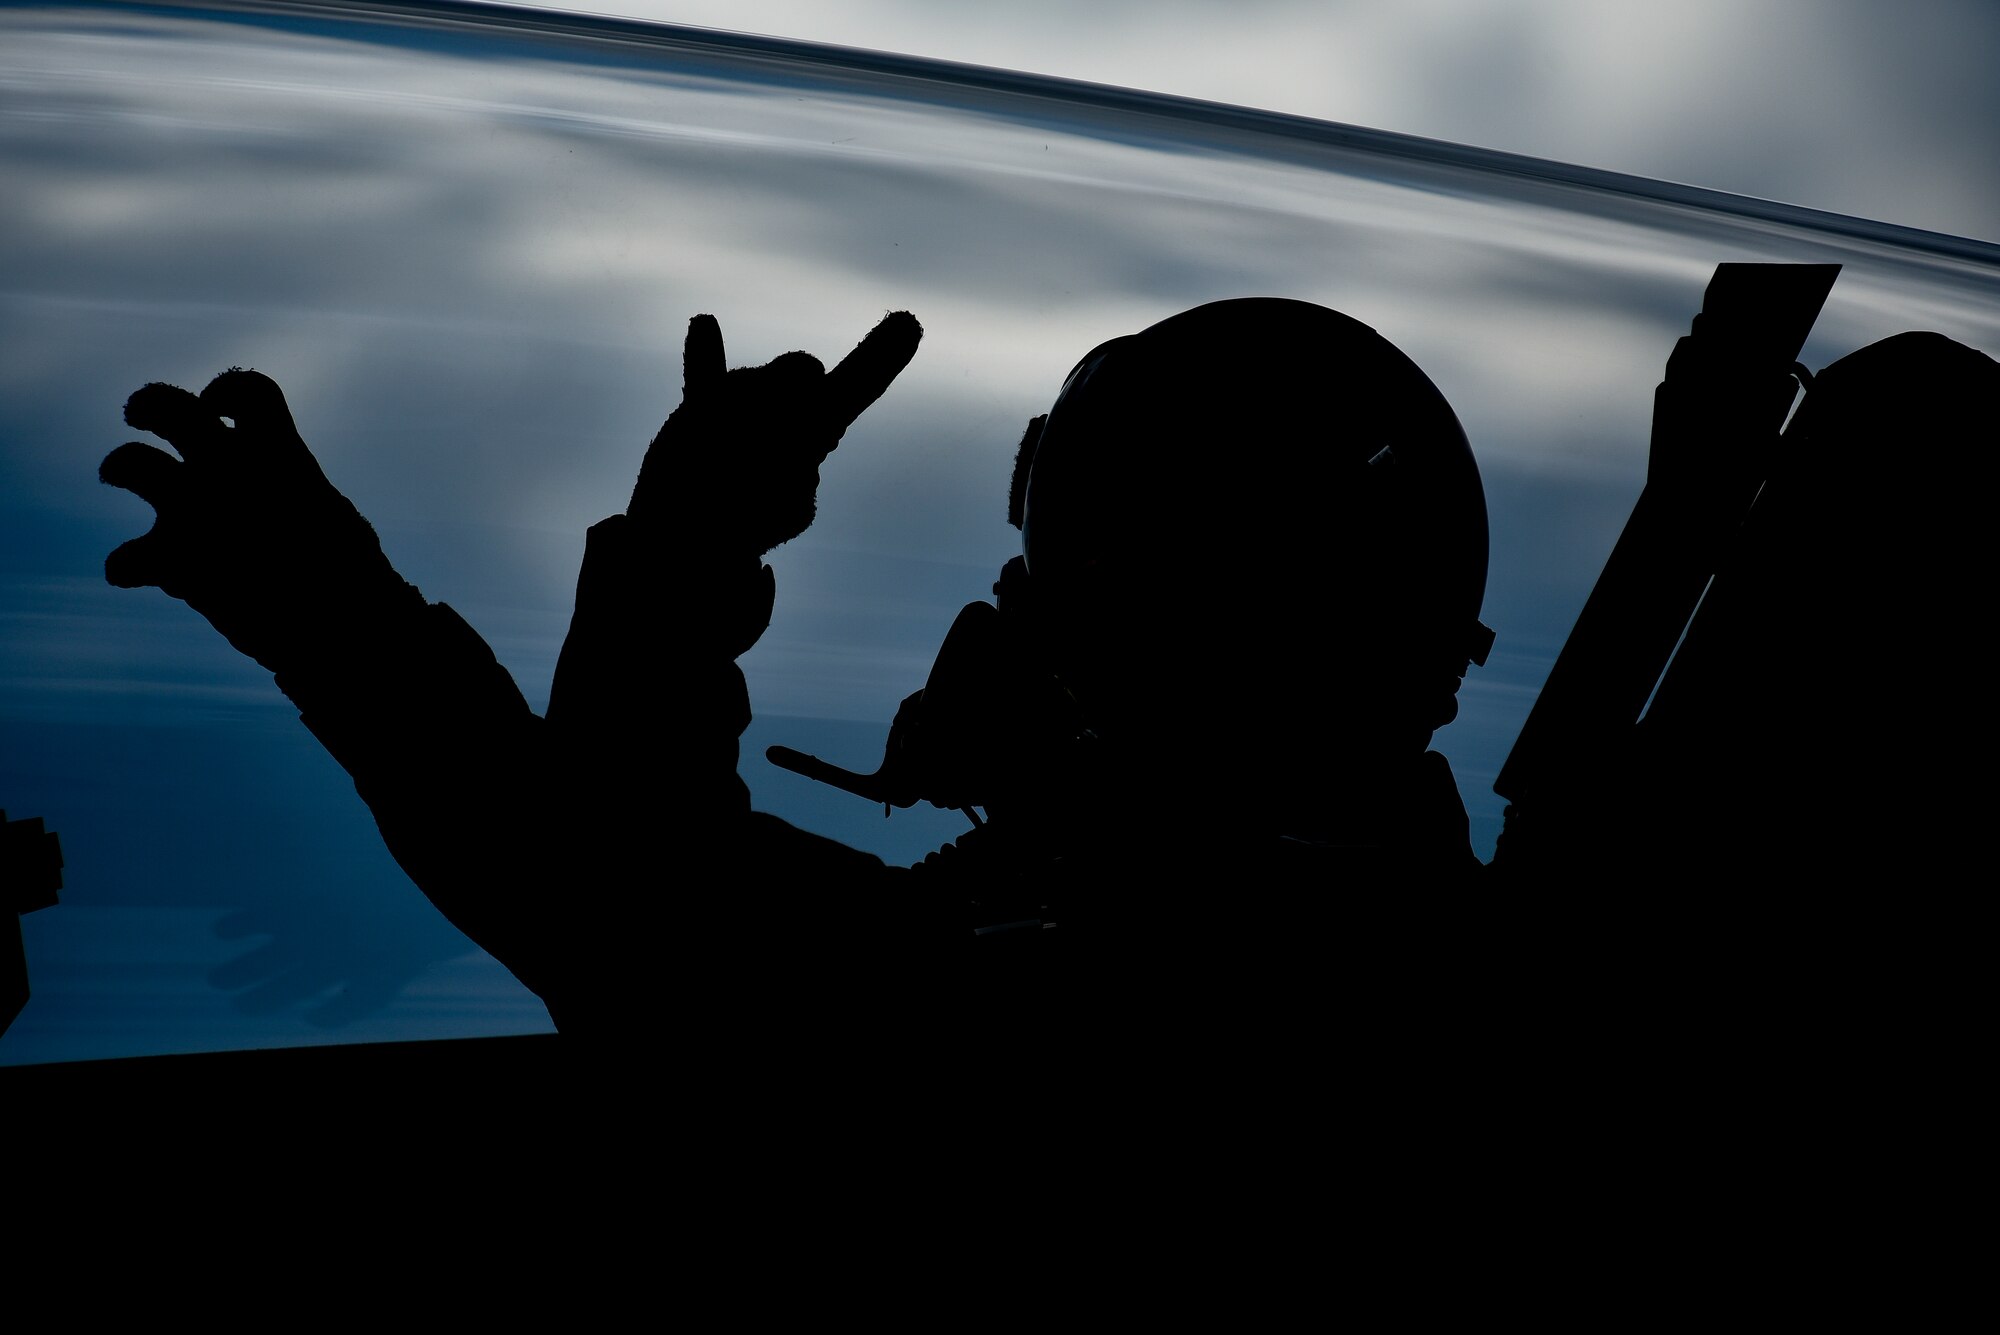 U.S. Air Force Col. R. Scott Jobe, the 35th Fighter Wing commander, throws up the 13th and 14th Fighter Squadrons' signs, respectively, before an F-2 familiarization flight at Misawa Air Base, Japan, June 22, 2018. This flight allowed Jobe to experience Japan Air Self-Defense Force tactics and aircraft capabilities. (U.S. Air Force photo by Airman 1st Class Collette Brooks)